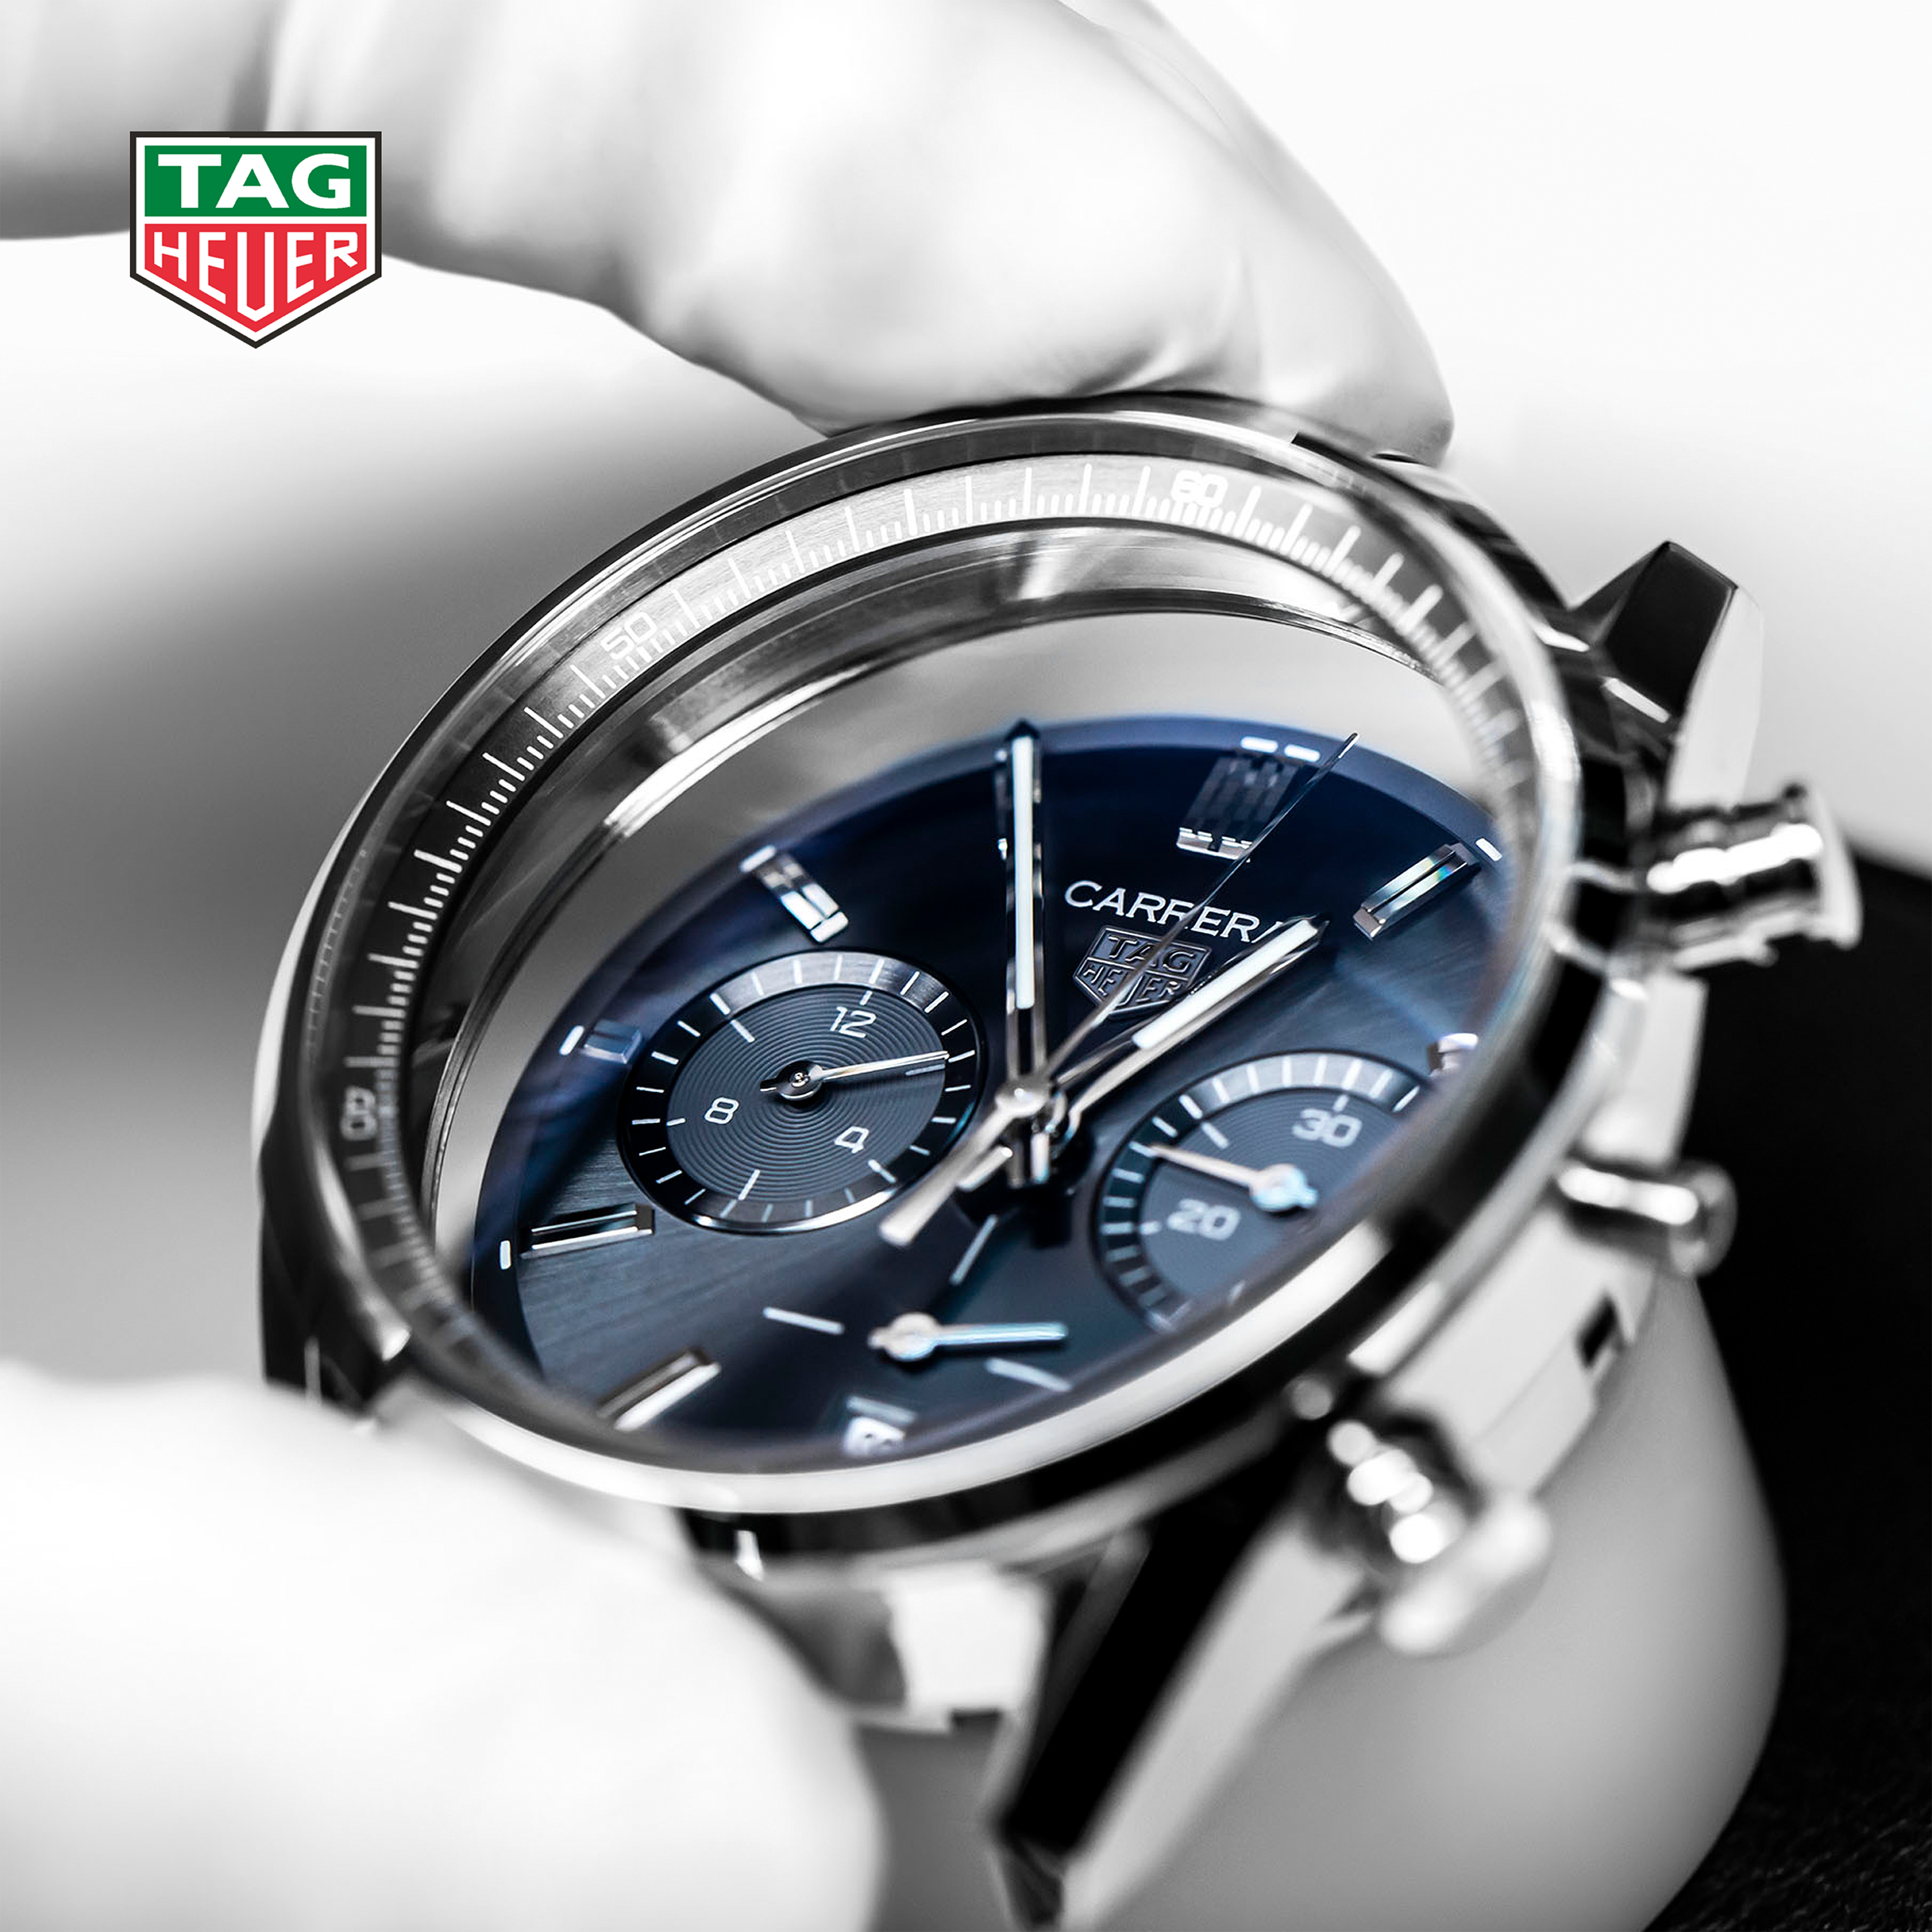 Part 4 - Putting a TAG Heuer watch together